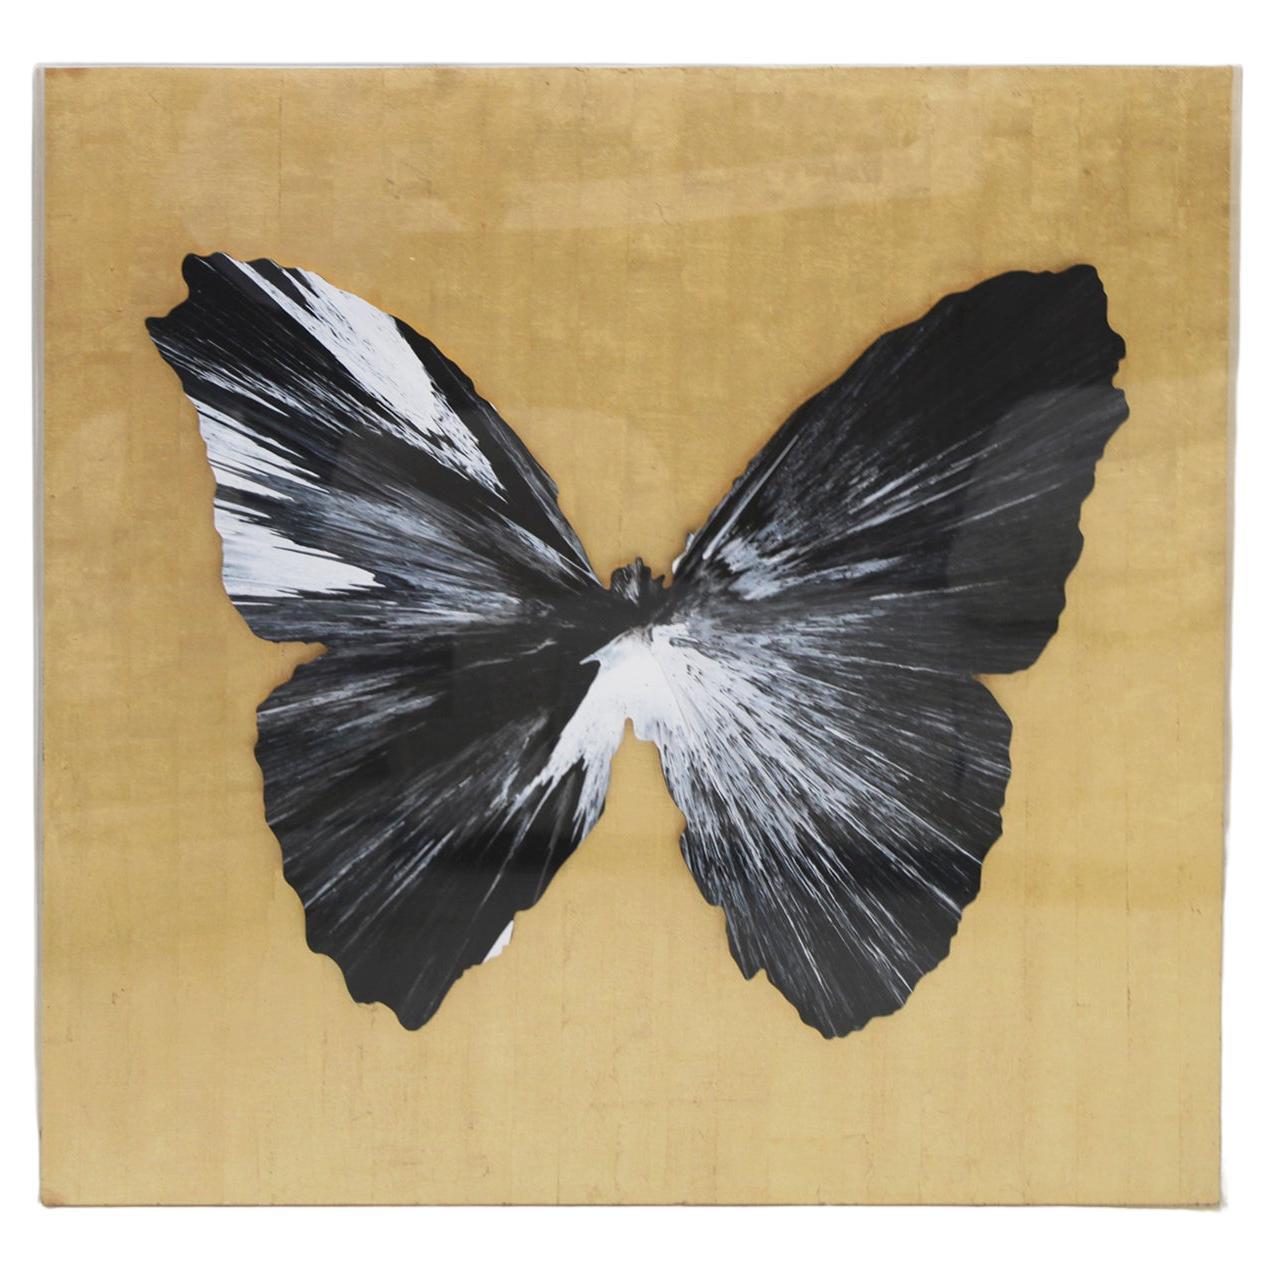 "Butterfly Painting" Damien Hirst, 2009